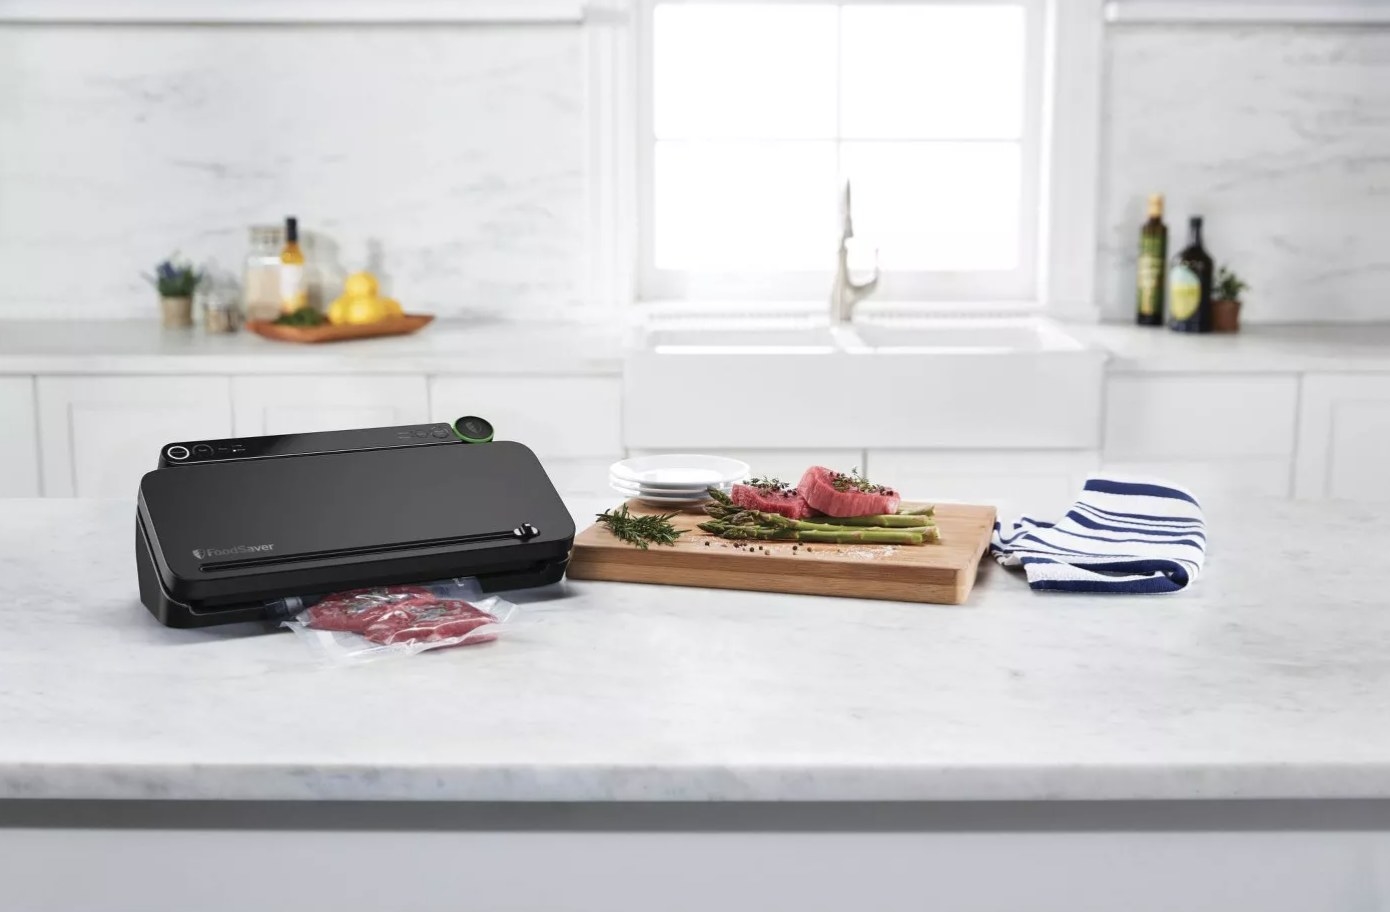 The black vacuum sealer is on a marble countertop and looks to be sealing some raw red meat